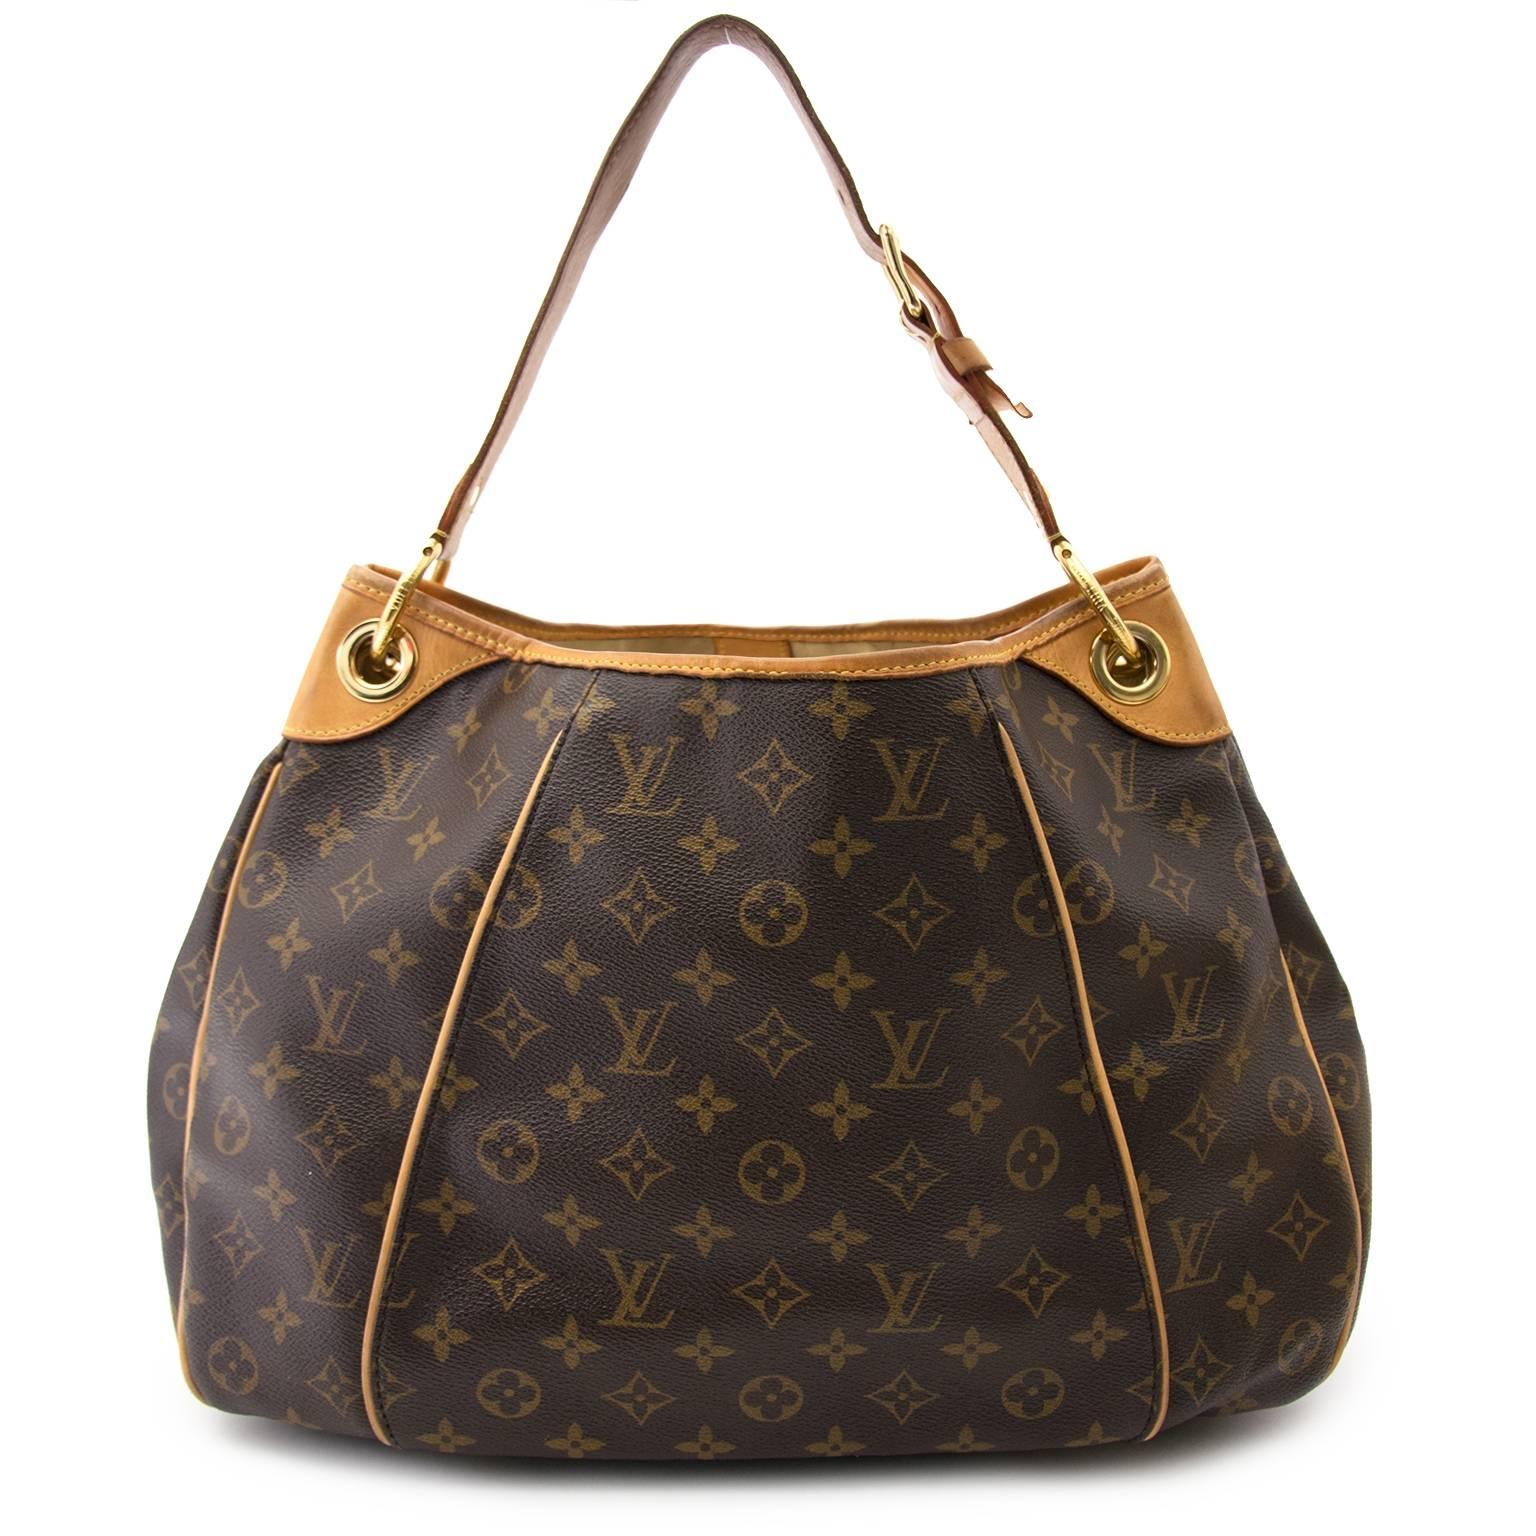 Good Preloved Condition

Louis Vuitton Galliera GM Monogram Bag

Go anywhere in style with this amazing Louis Vuitton Galliera in monogram coated canvas and vachetta cowhide leather.

The bag has a adjustable leather shoulder strap, giving it an